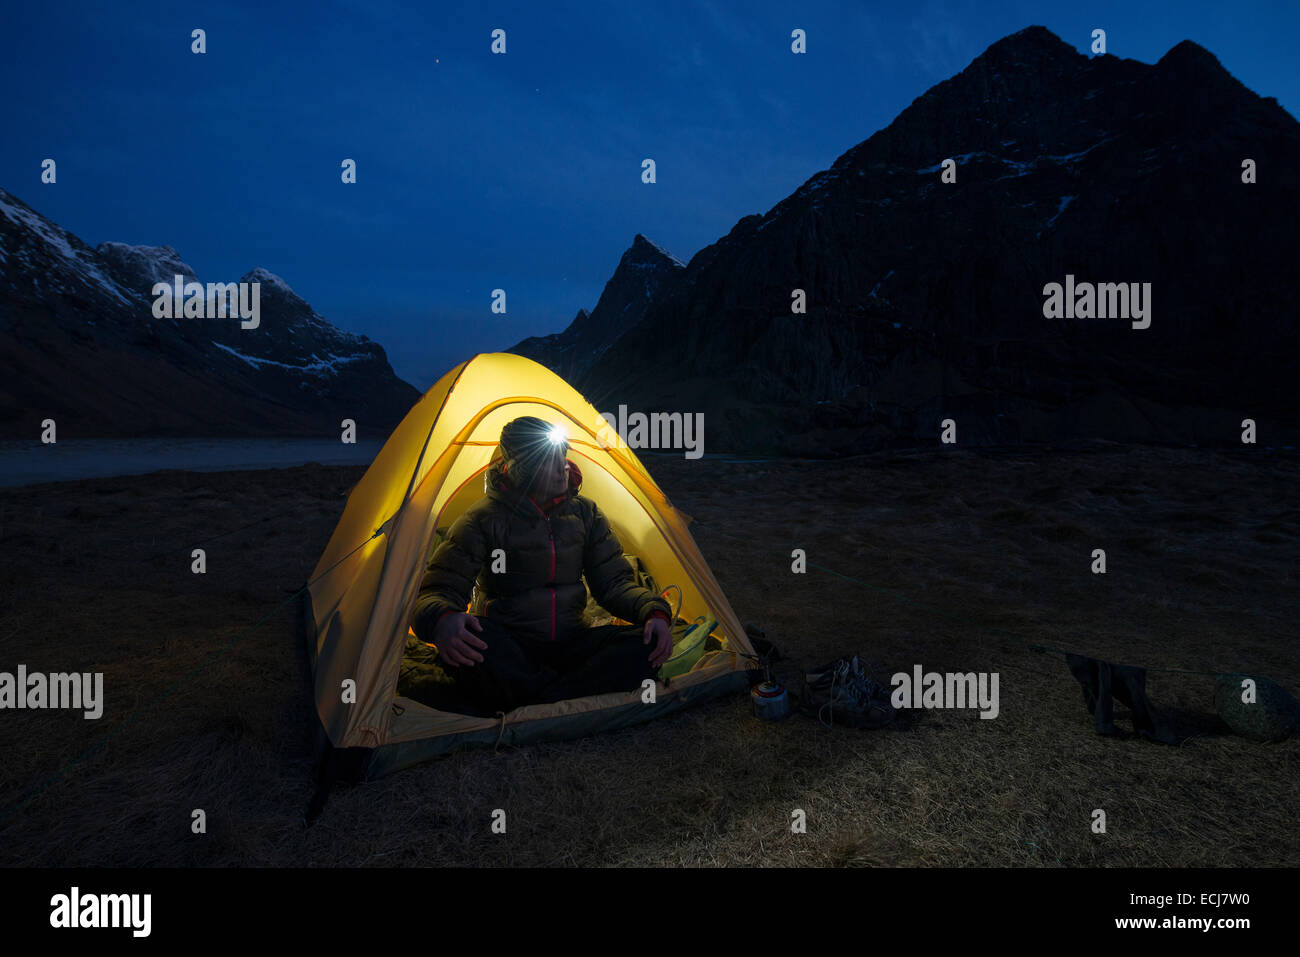 Female hiker sits in tent illuminated at night while wild camping at scenic Horseid beach, Moskenesøy, Lofoten Islands, Norway Stock Photo